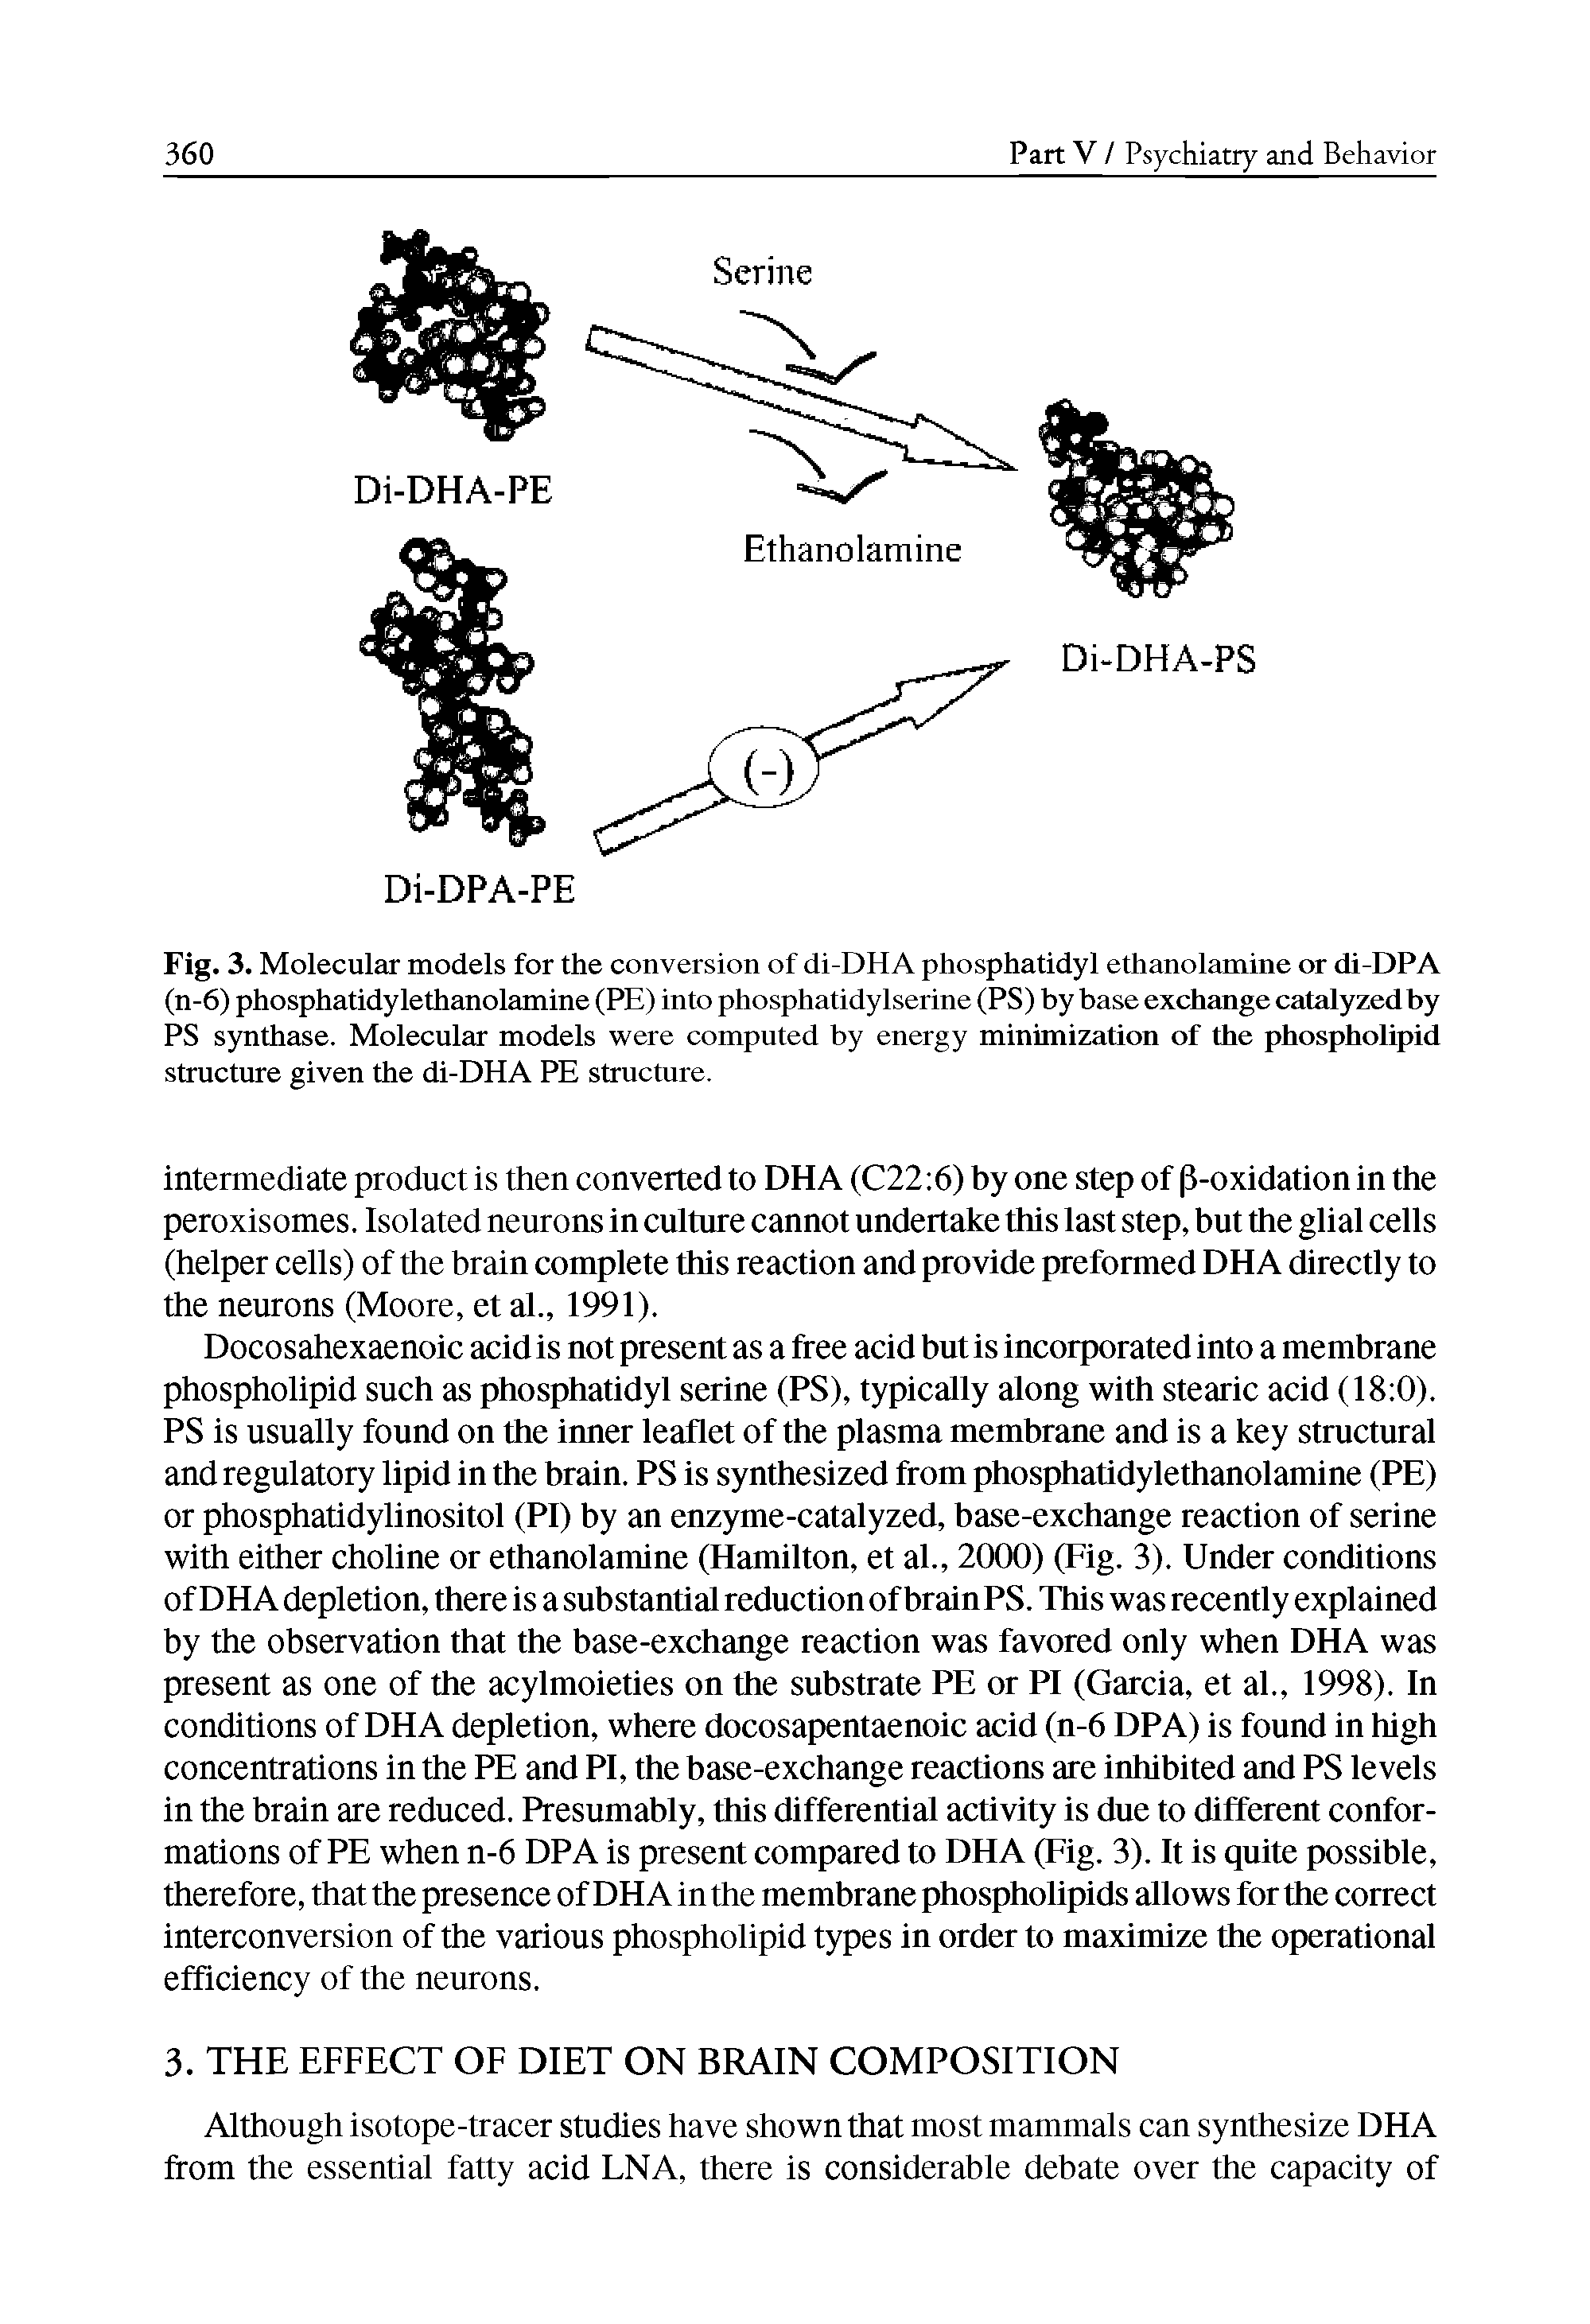 Fig. 3. Molecular models for the conversion of di-DHA phosphatidyl ethanolamine or di-DPA (n-6) phosphatidylethanolamine (PE) into phosphatidylserine (PS) by base exchange catalyzed by PS synthase. Molecular models were computed by energy minimization of the phospholipid structure given the di-DHA PE structure.